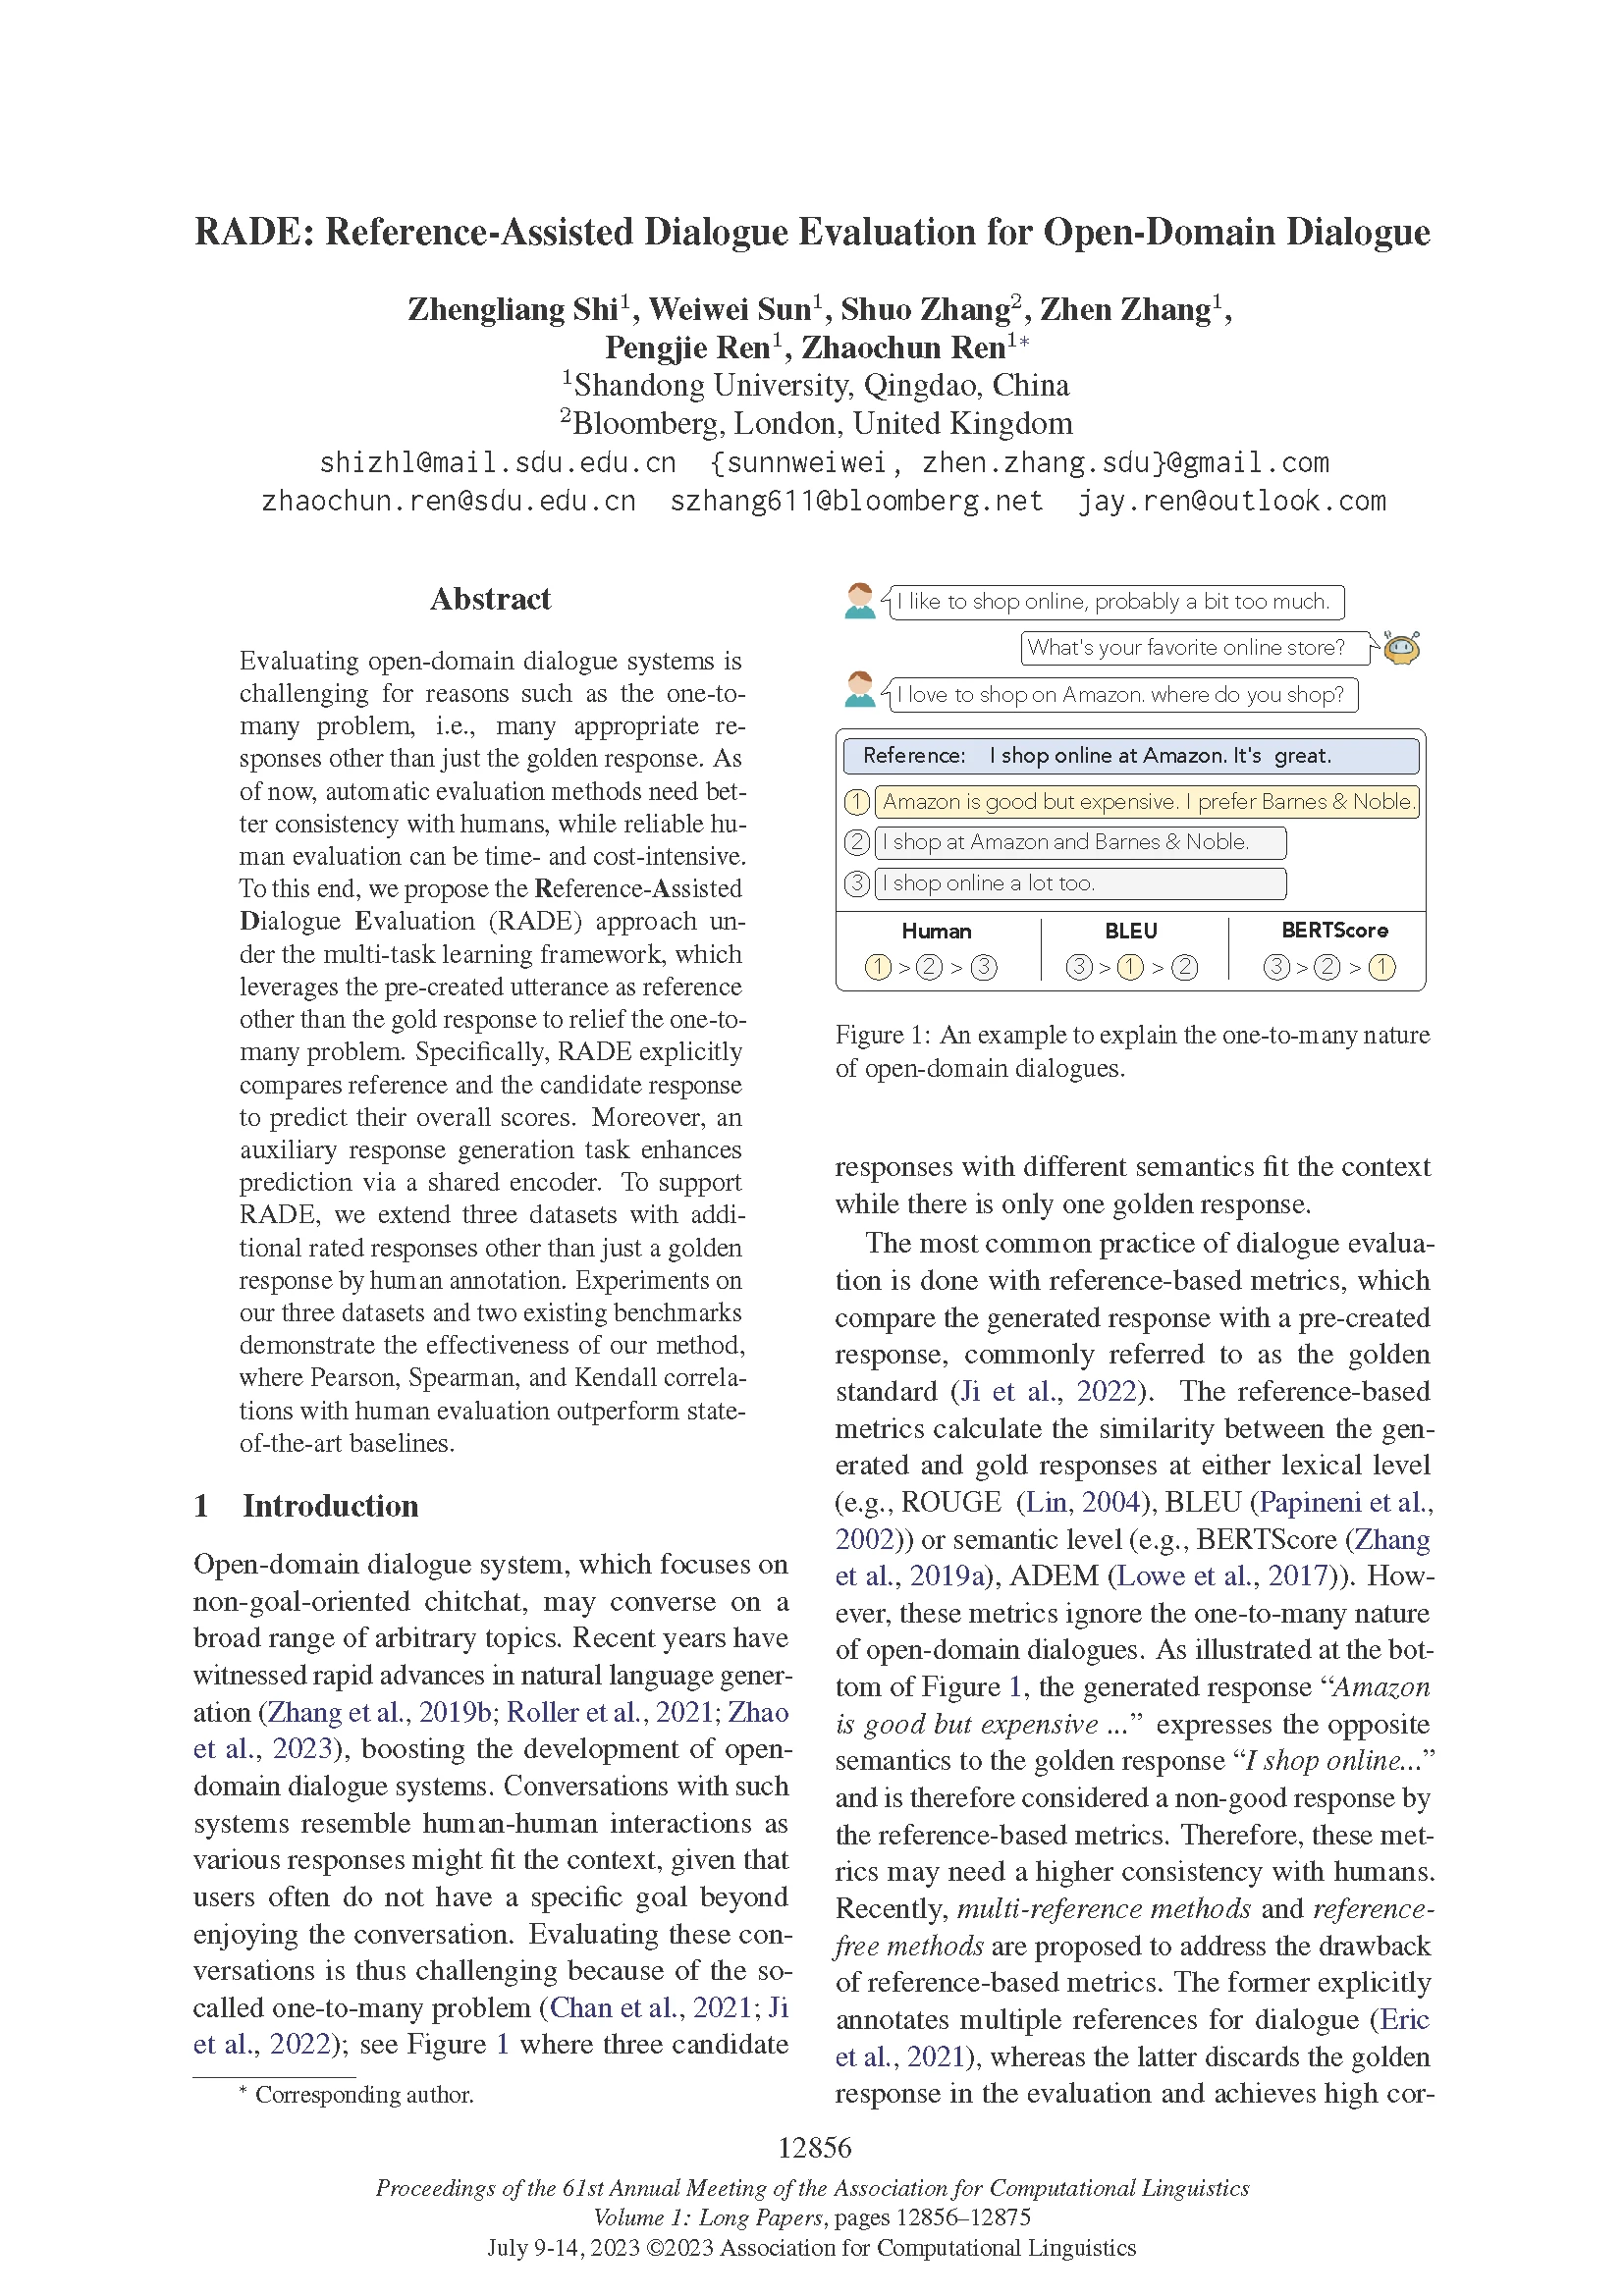 Front page of ACL 2023 paper "RADE: Reference-Assisted Dialogue Evaluation for Open-Domain Dialogue"